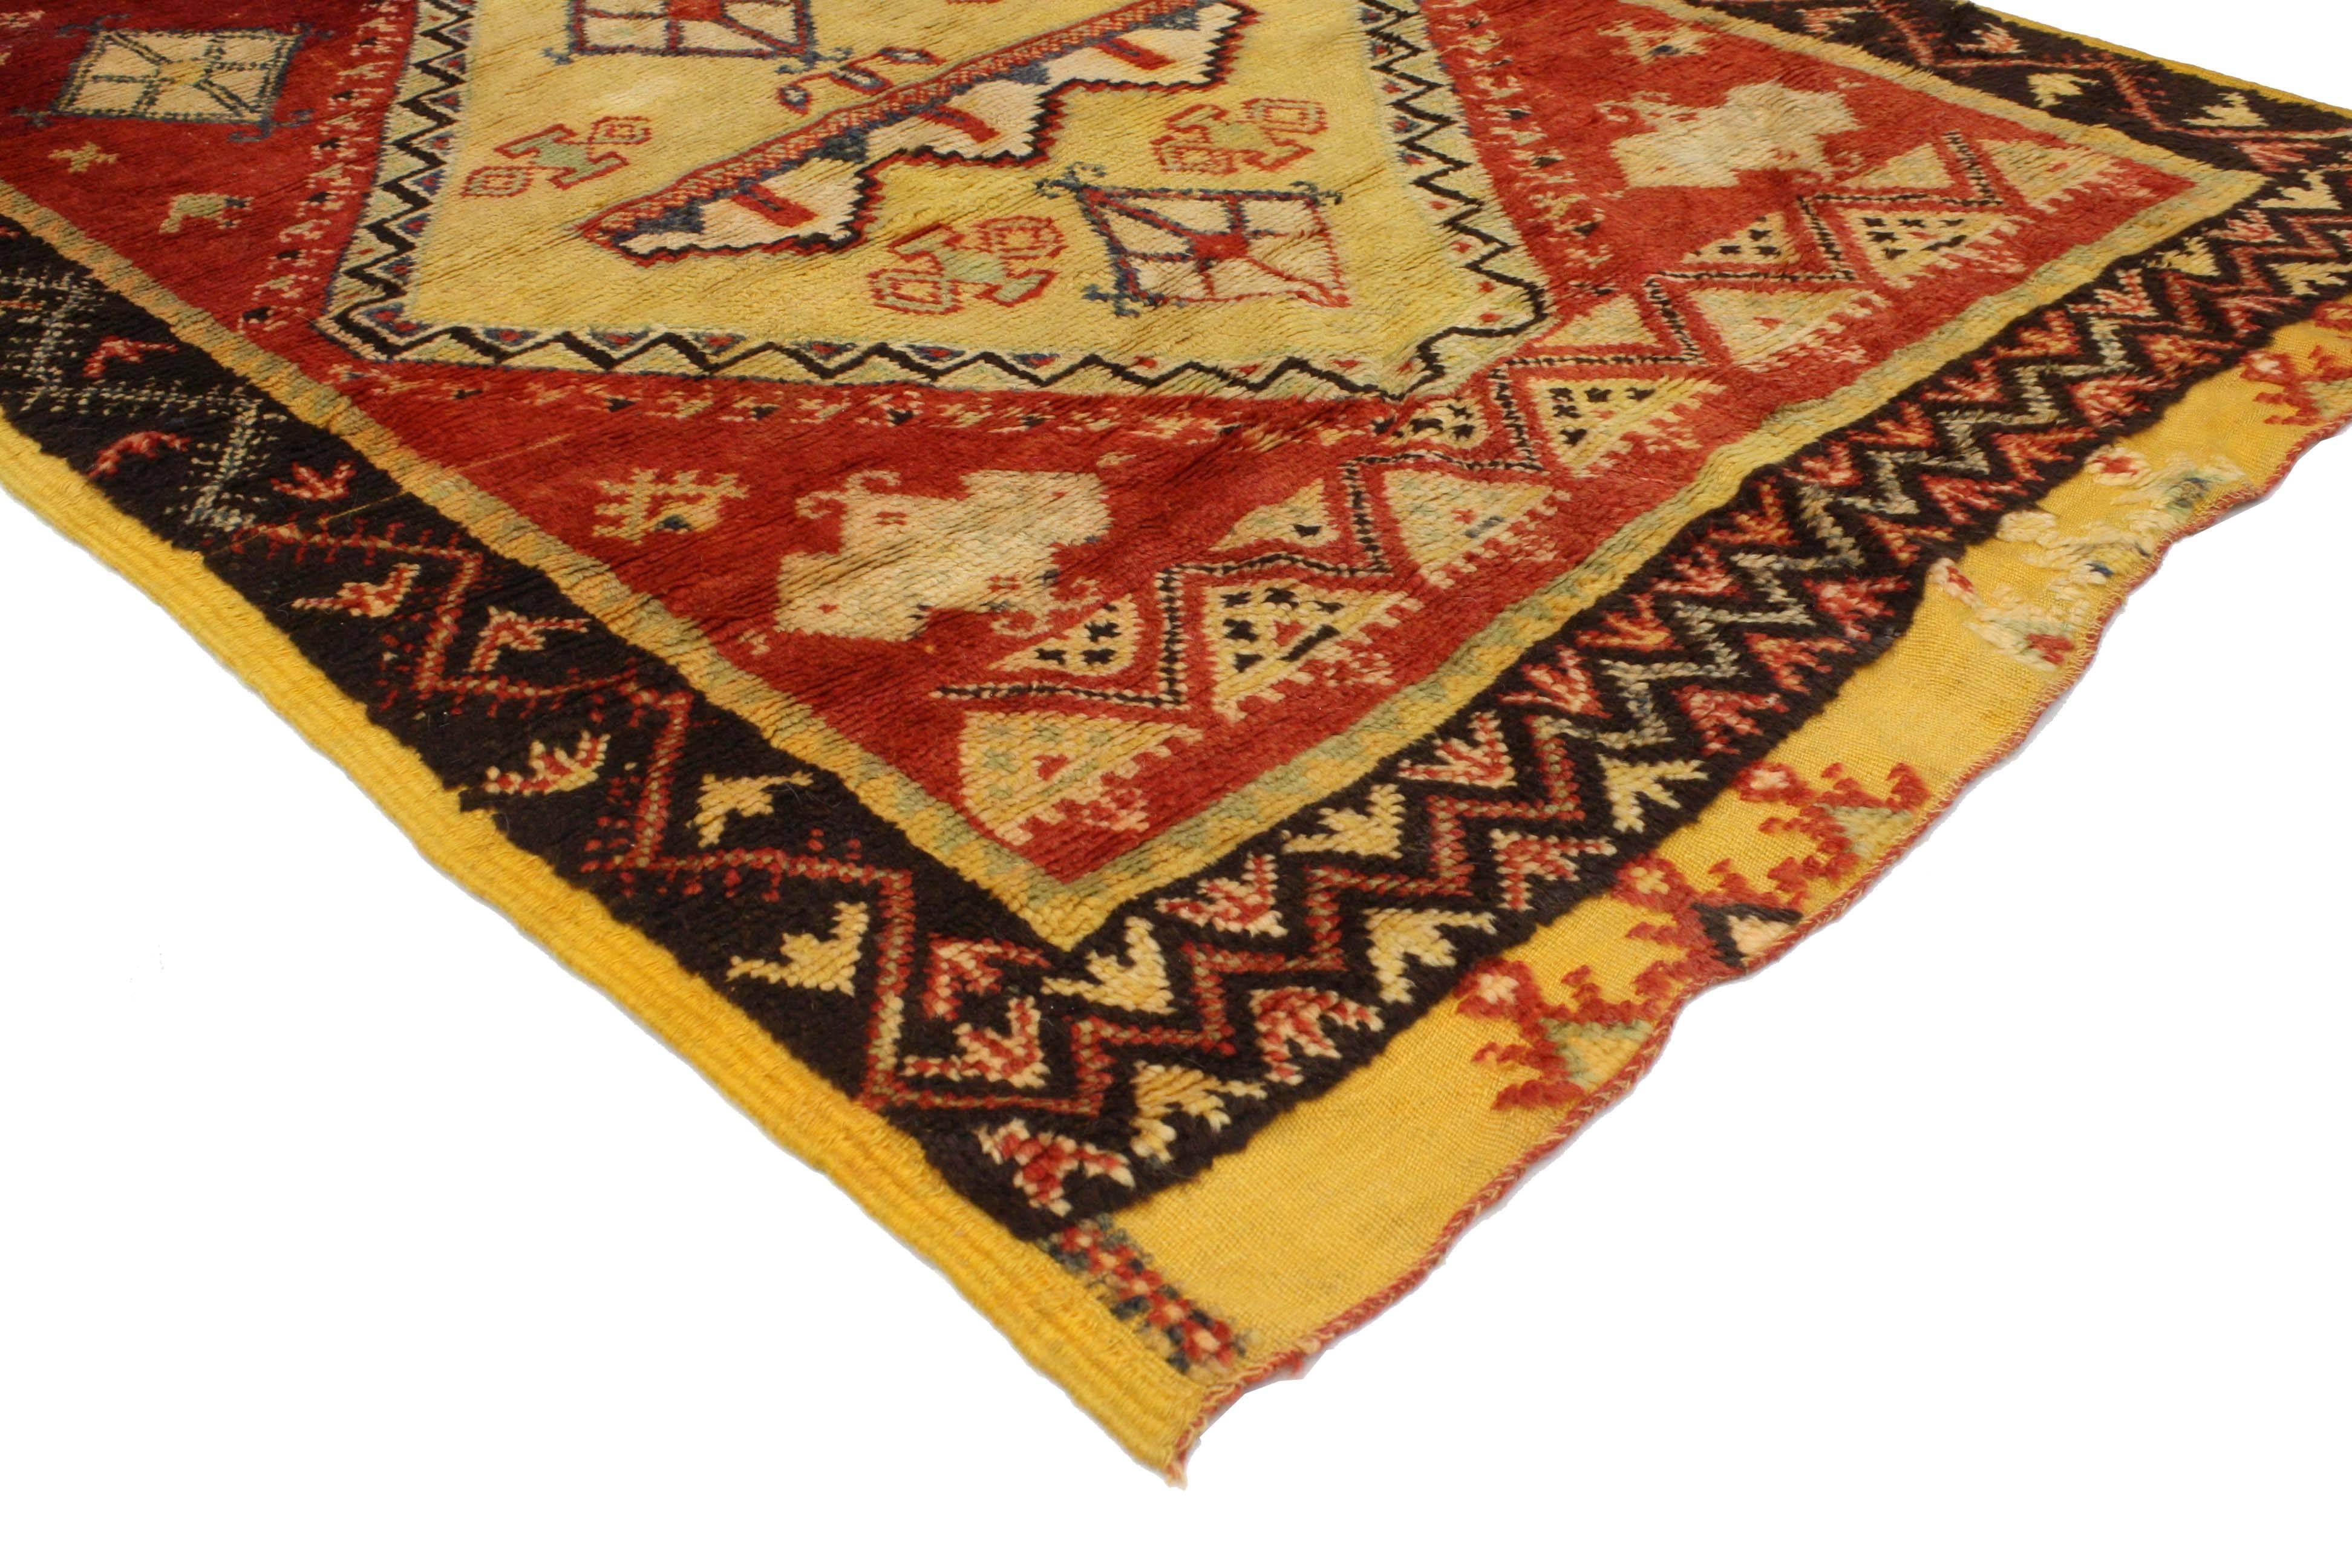 Impeccably woven from hand-knotted wool and displaying a modern tribal style, this vintage Berber Moroccan rug features three medallions surrounded by symbolic Berber motifs in an abrashed red field. Blending the graphic appeal and folk art warmth